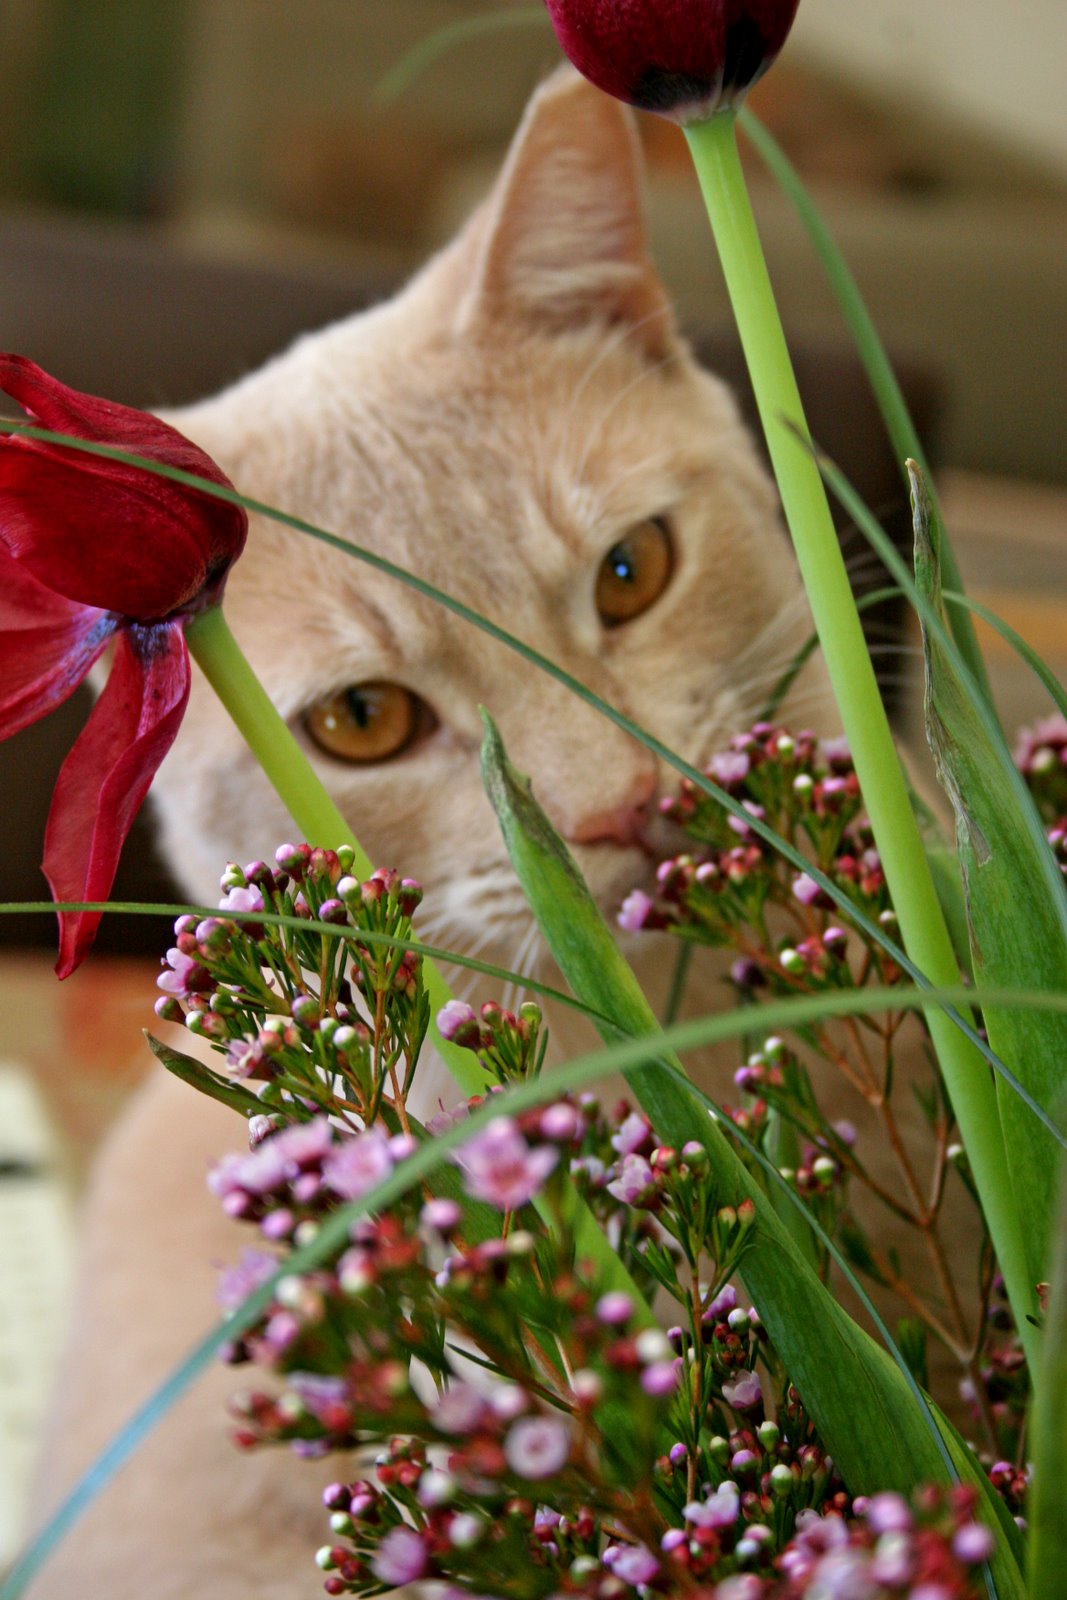 [Oliver+with+flowers+003b.jpg]